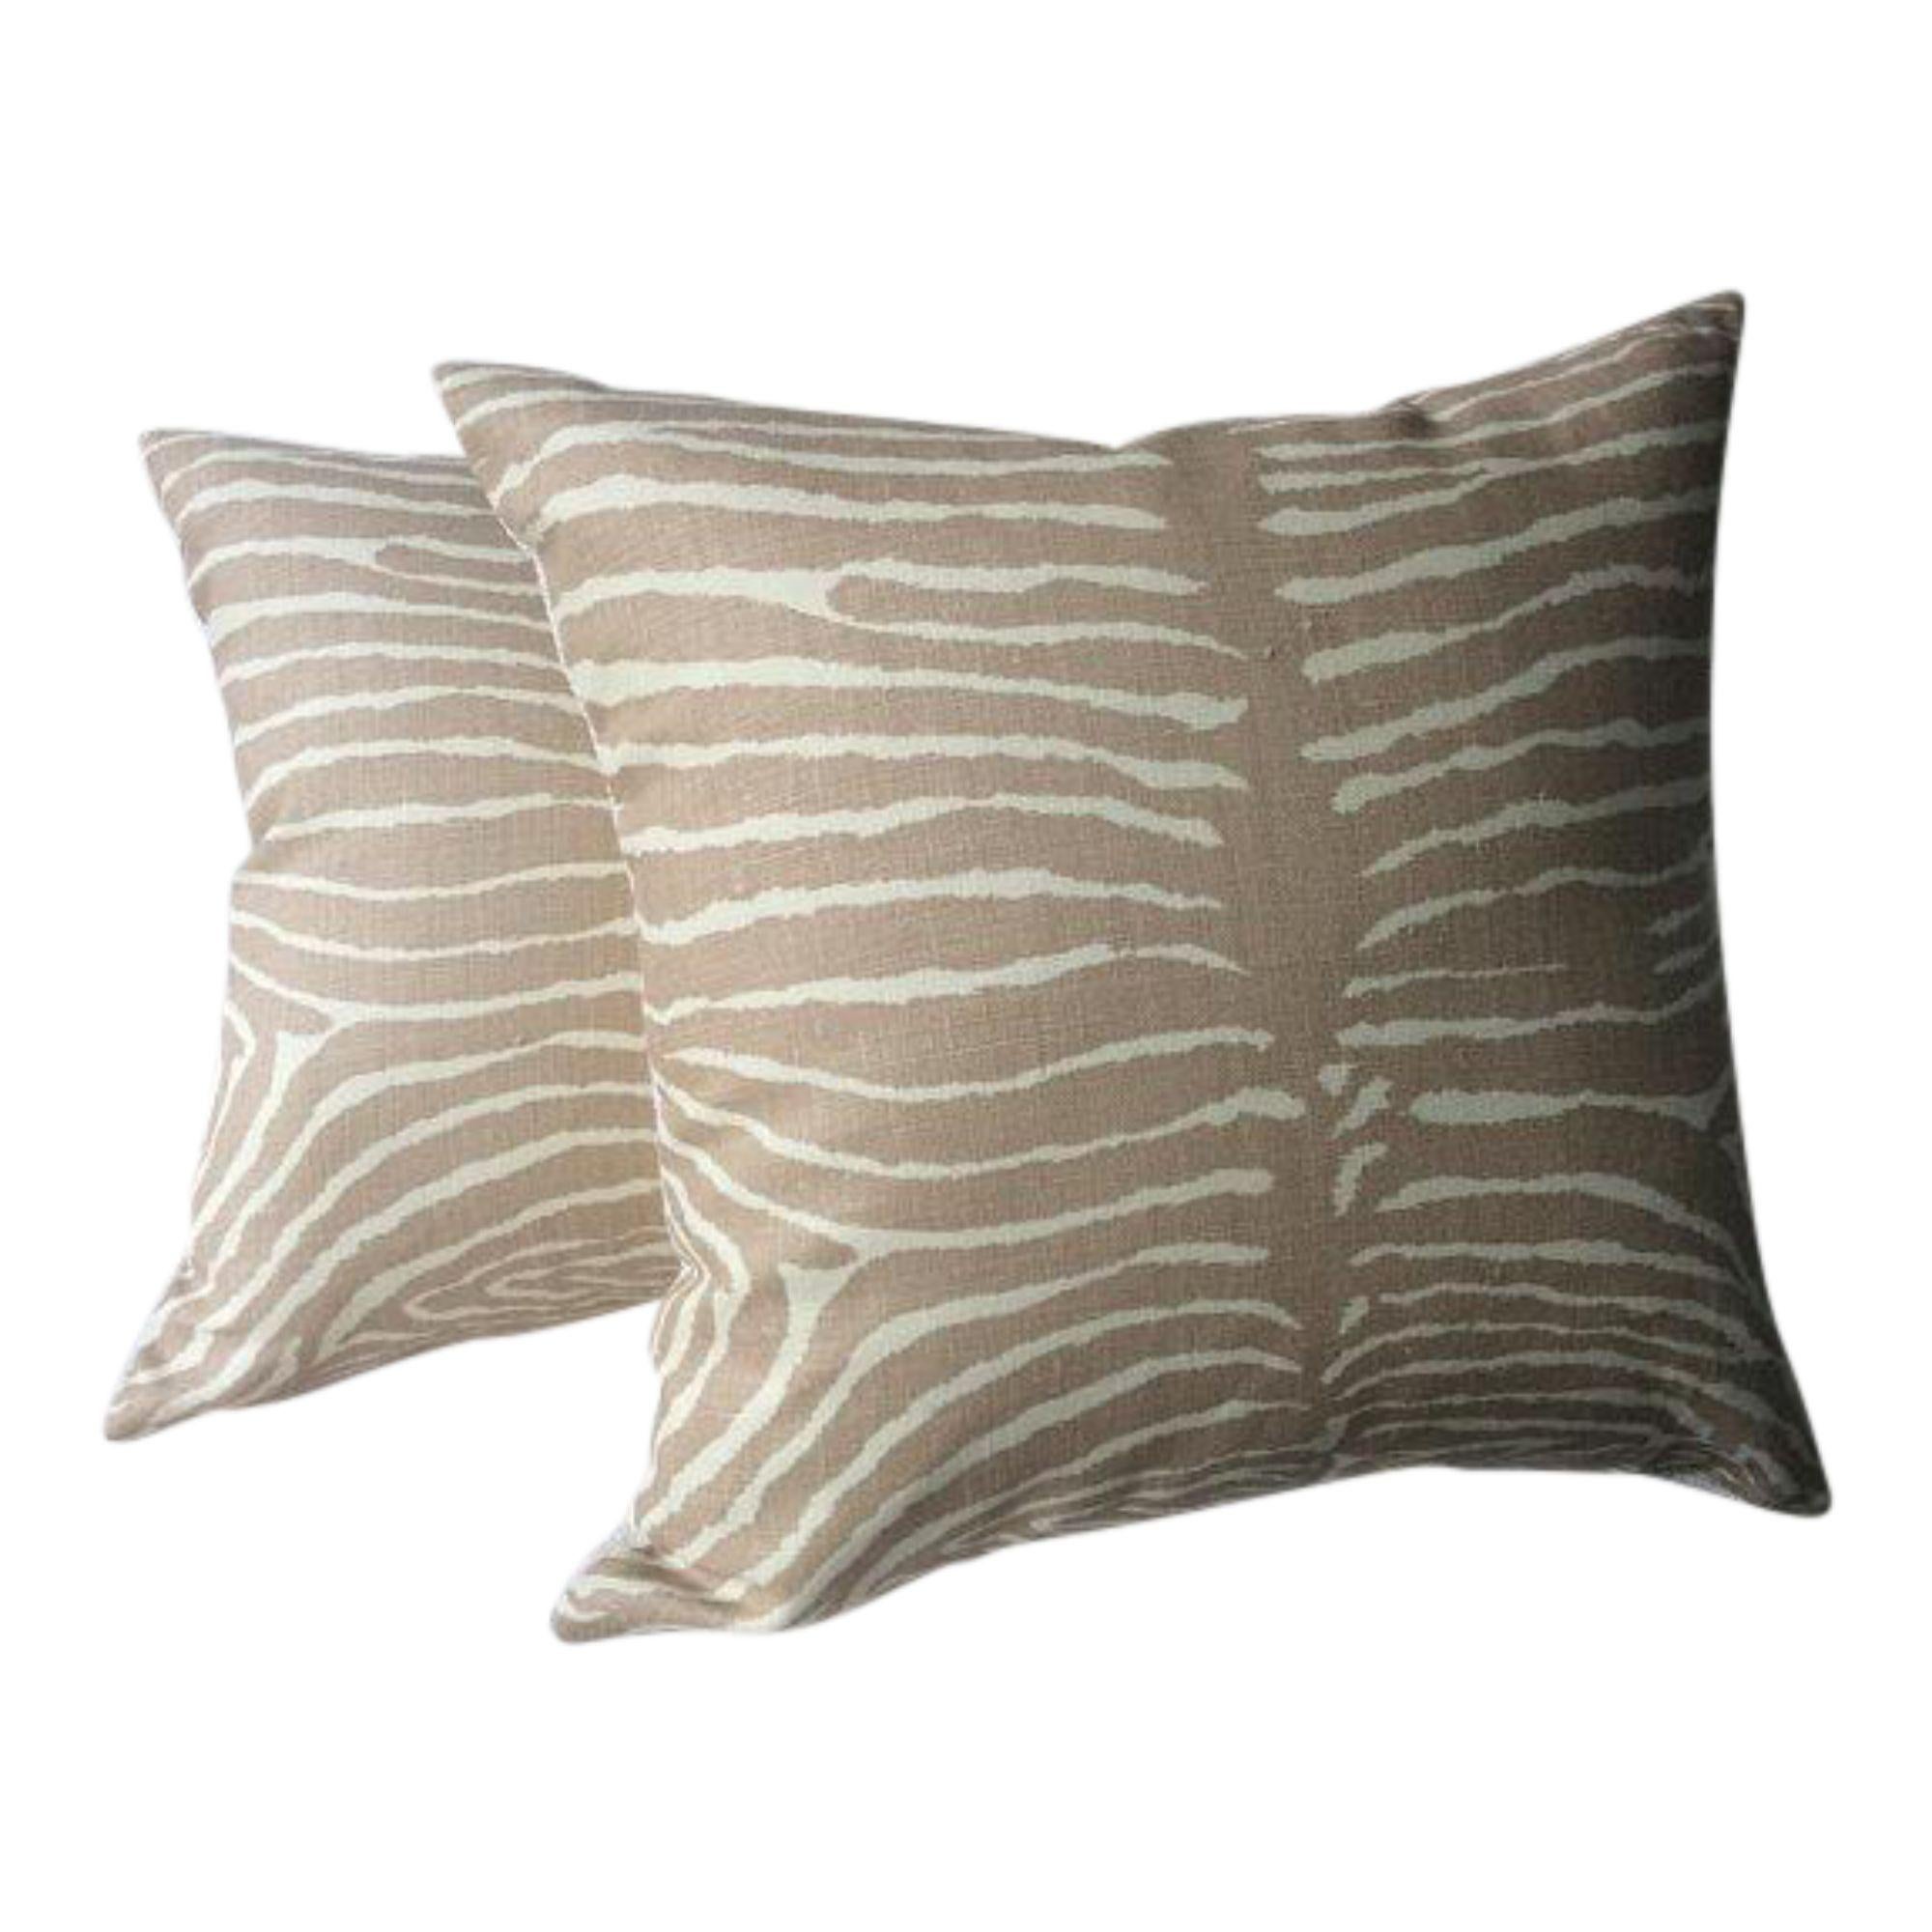 Brunschwig and Fils “Pewter” Le Zebre Tan Pillows - a Pair For Sale